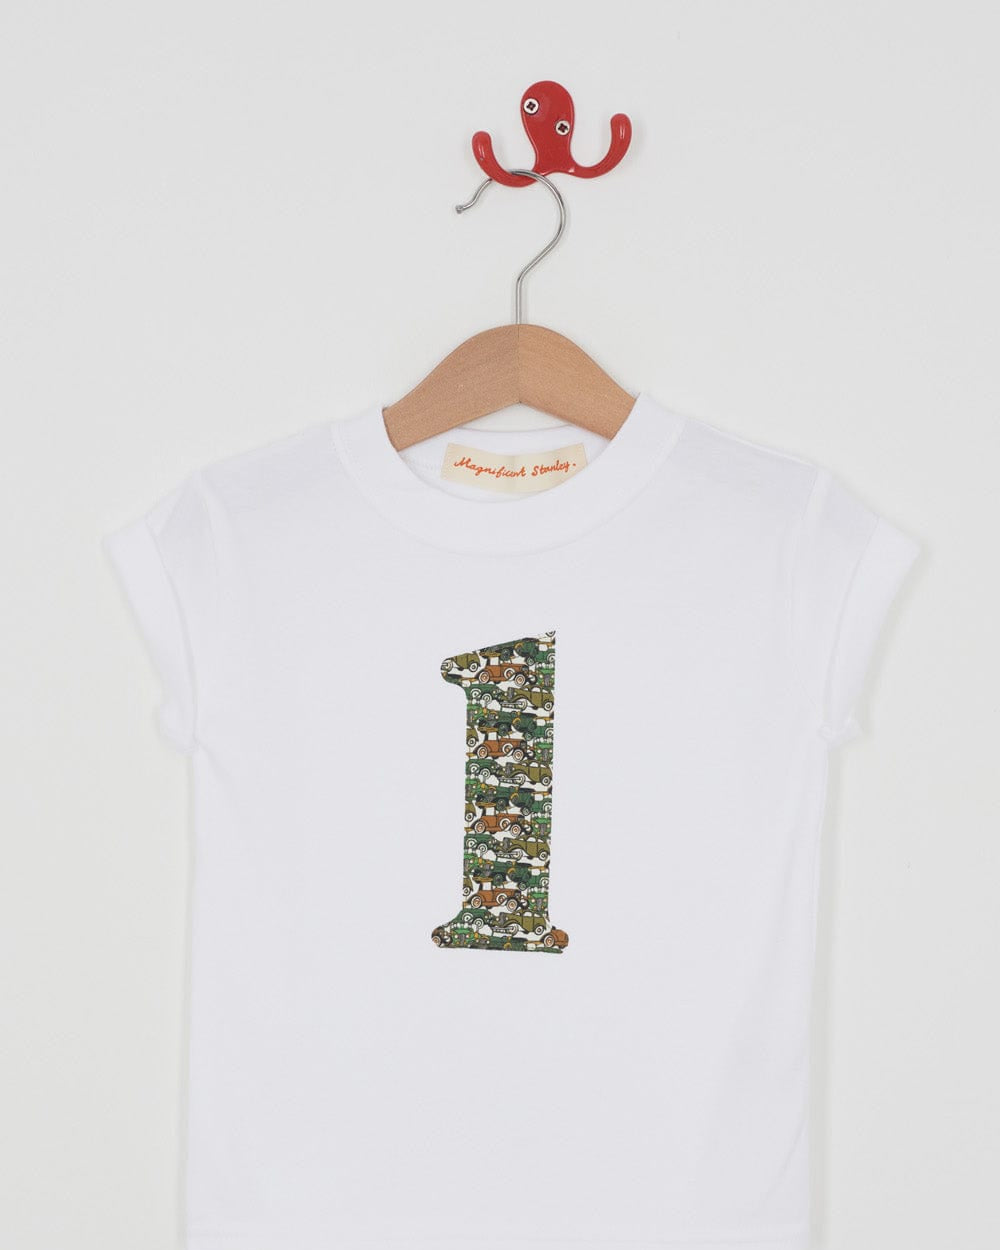 Magnificent Stanley Tee Number White T-Shirt in Roaring Wheels Liberty Print